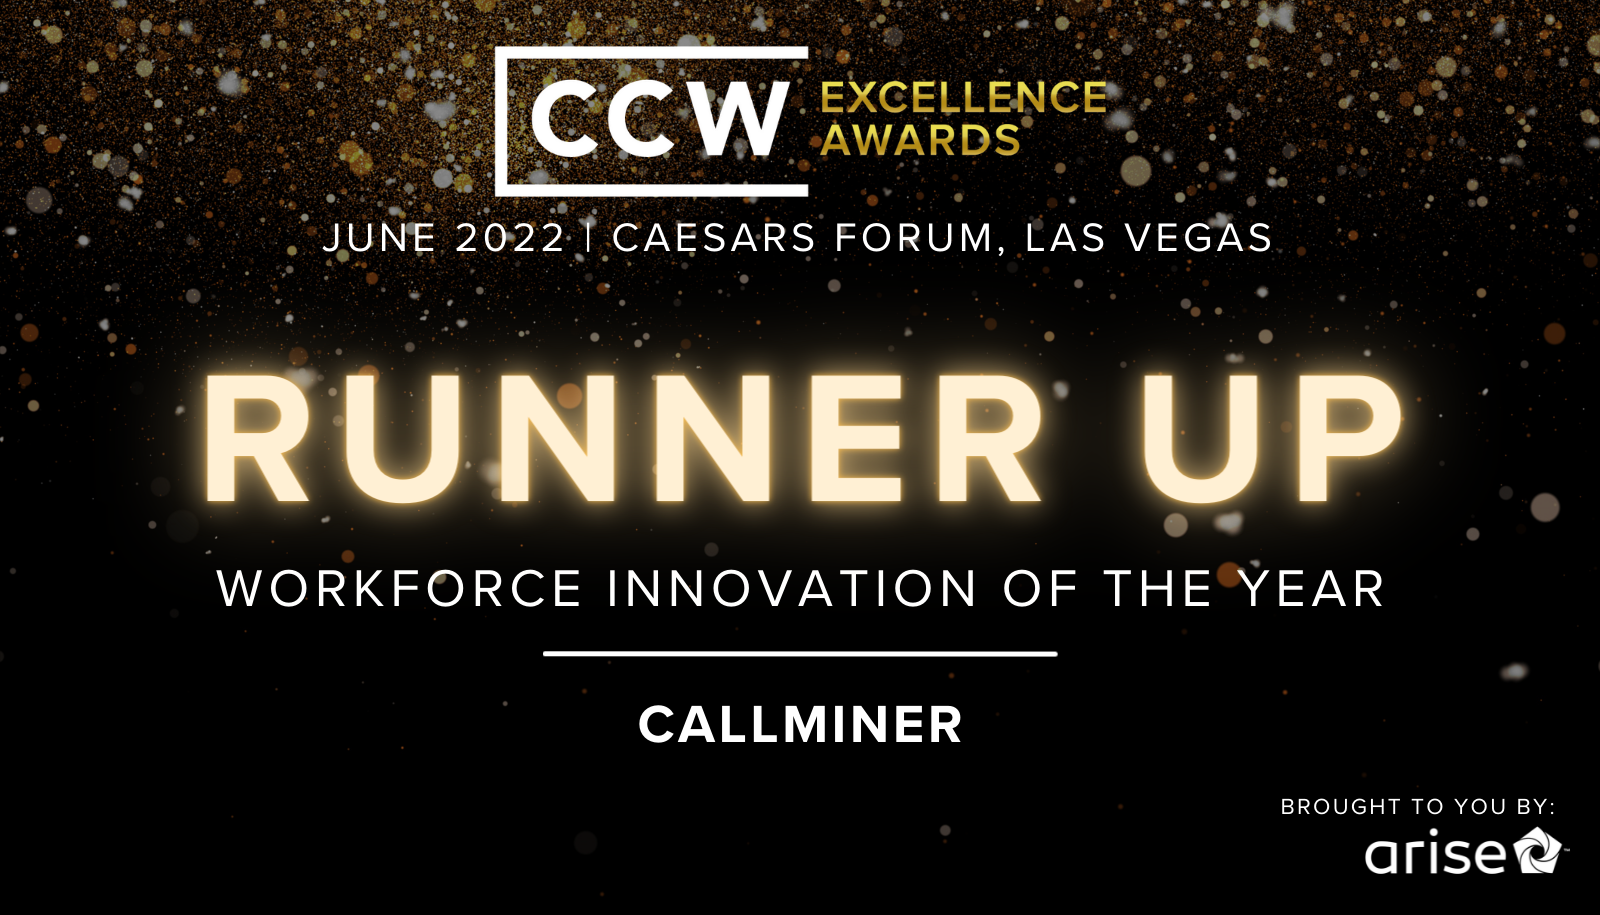 CCW Excellence Awards Workforce Innovation